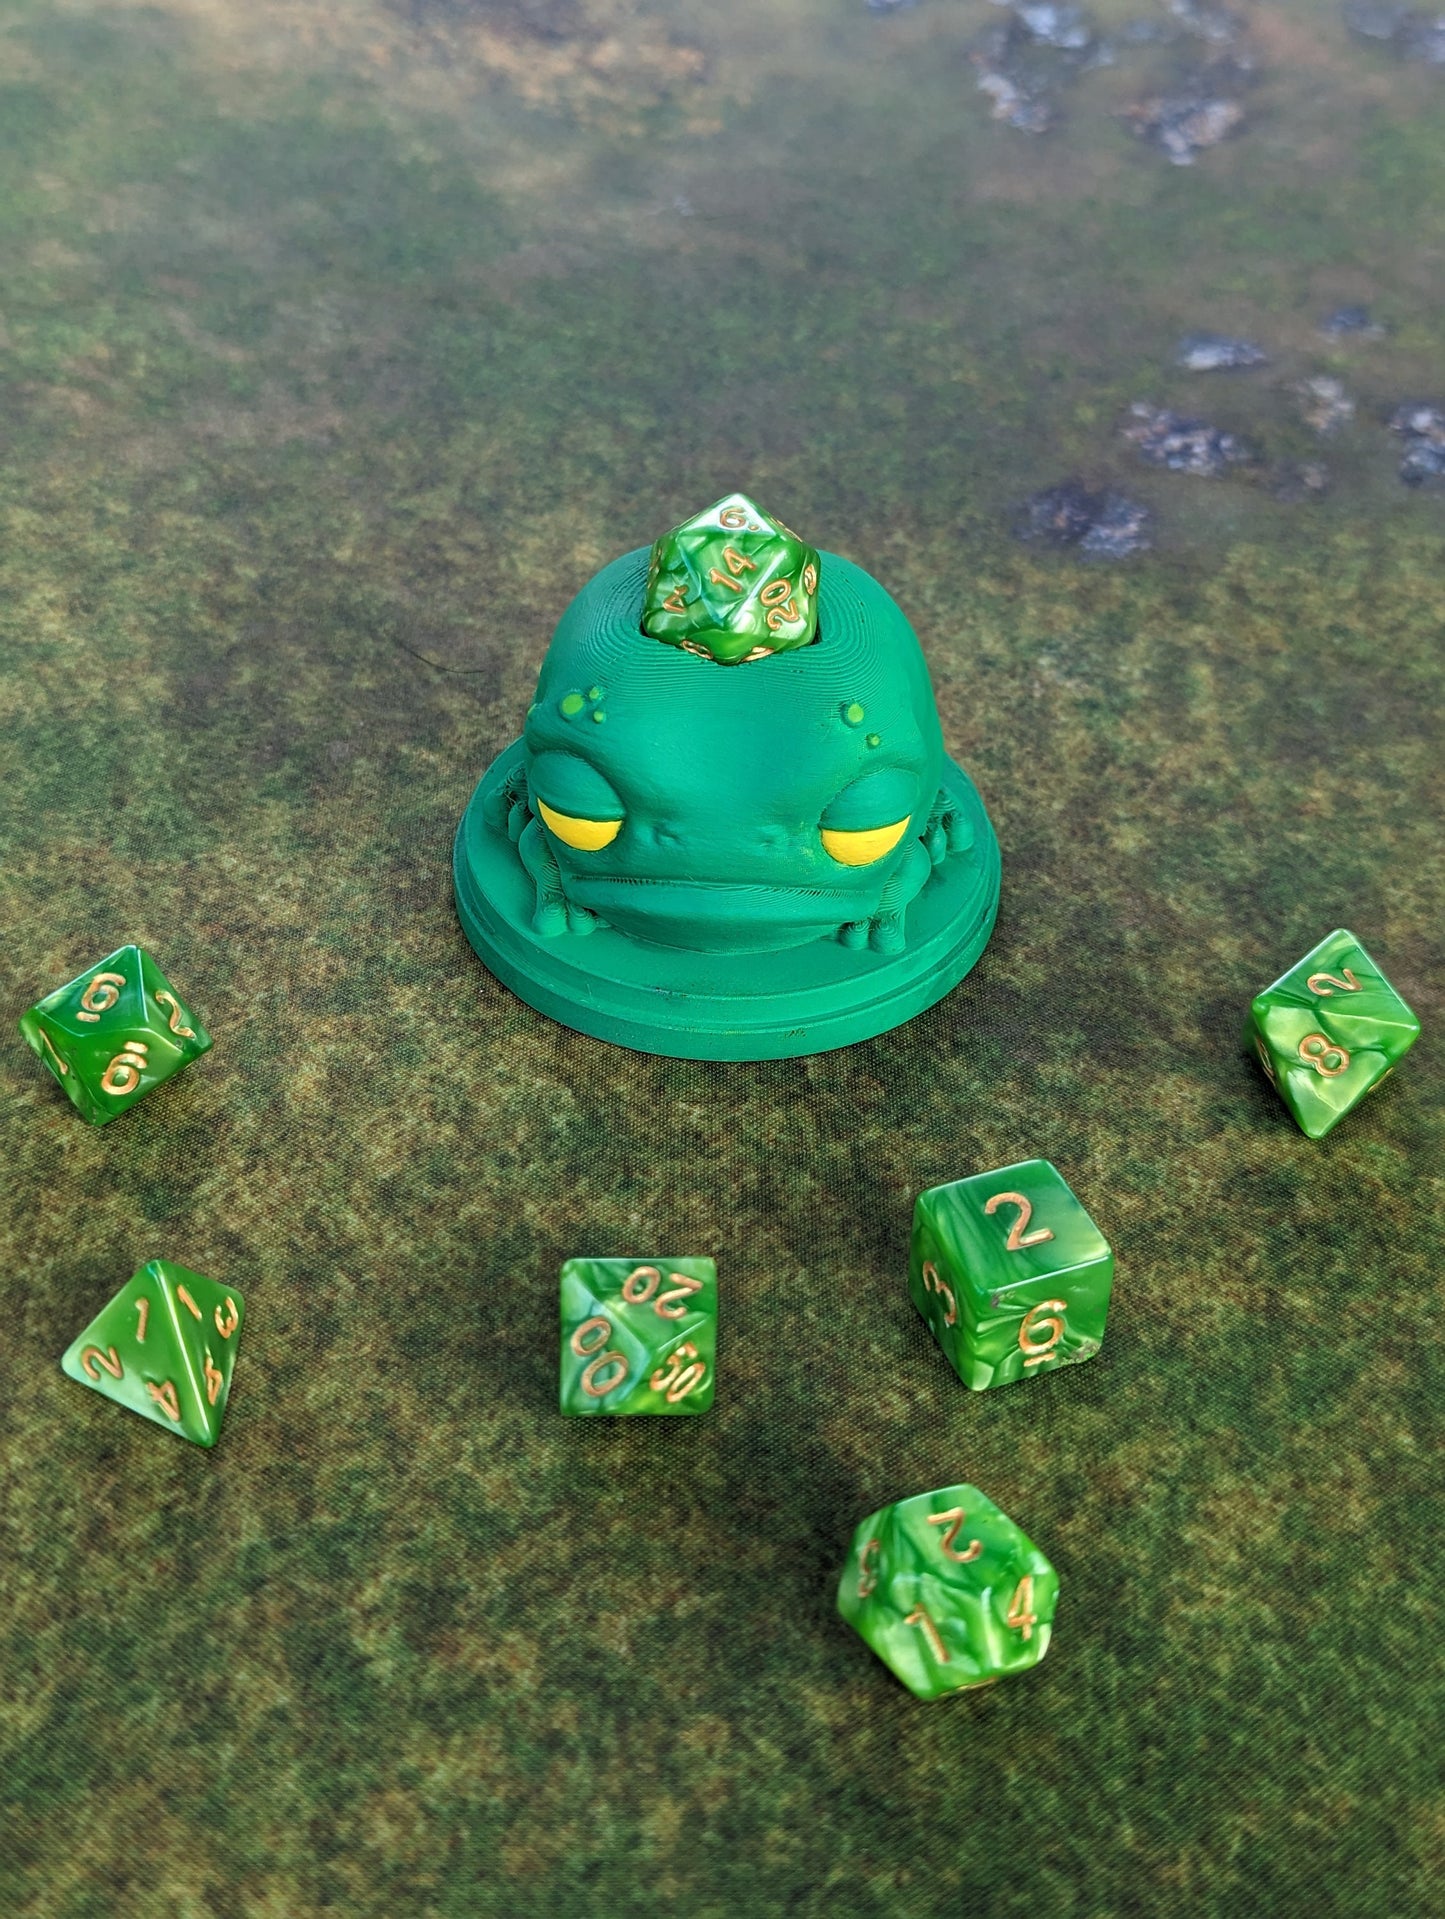 Rustifar Frog Toy 3D Printed Dice Guardian - Dice Jail | RPG Dice Vault | D20 Box | Player Unique Gift - Whimsical Dice Holder!